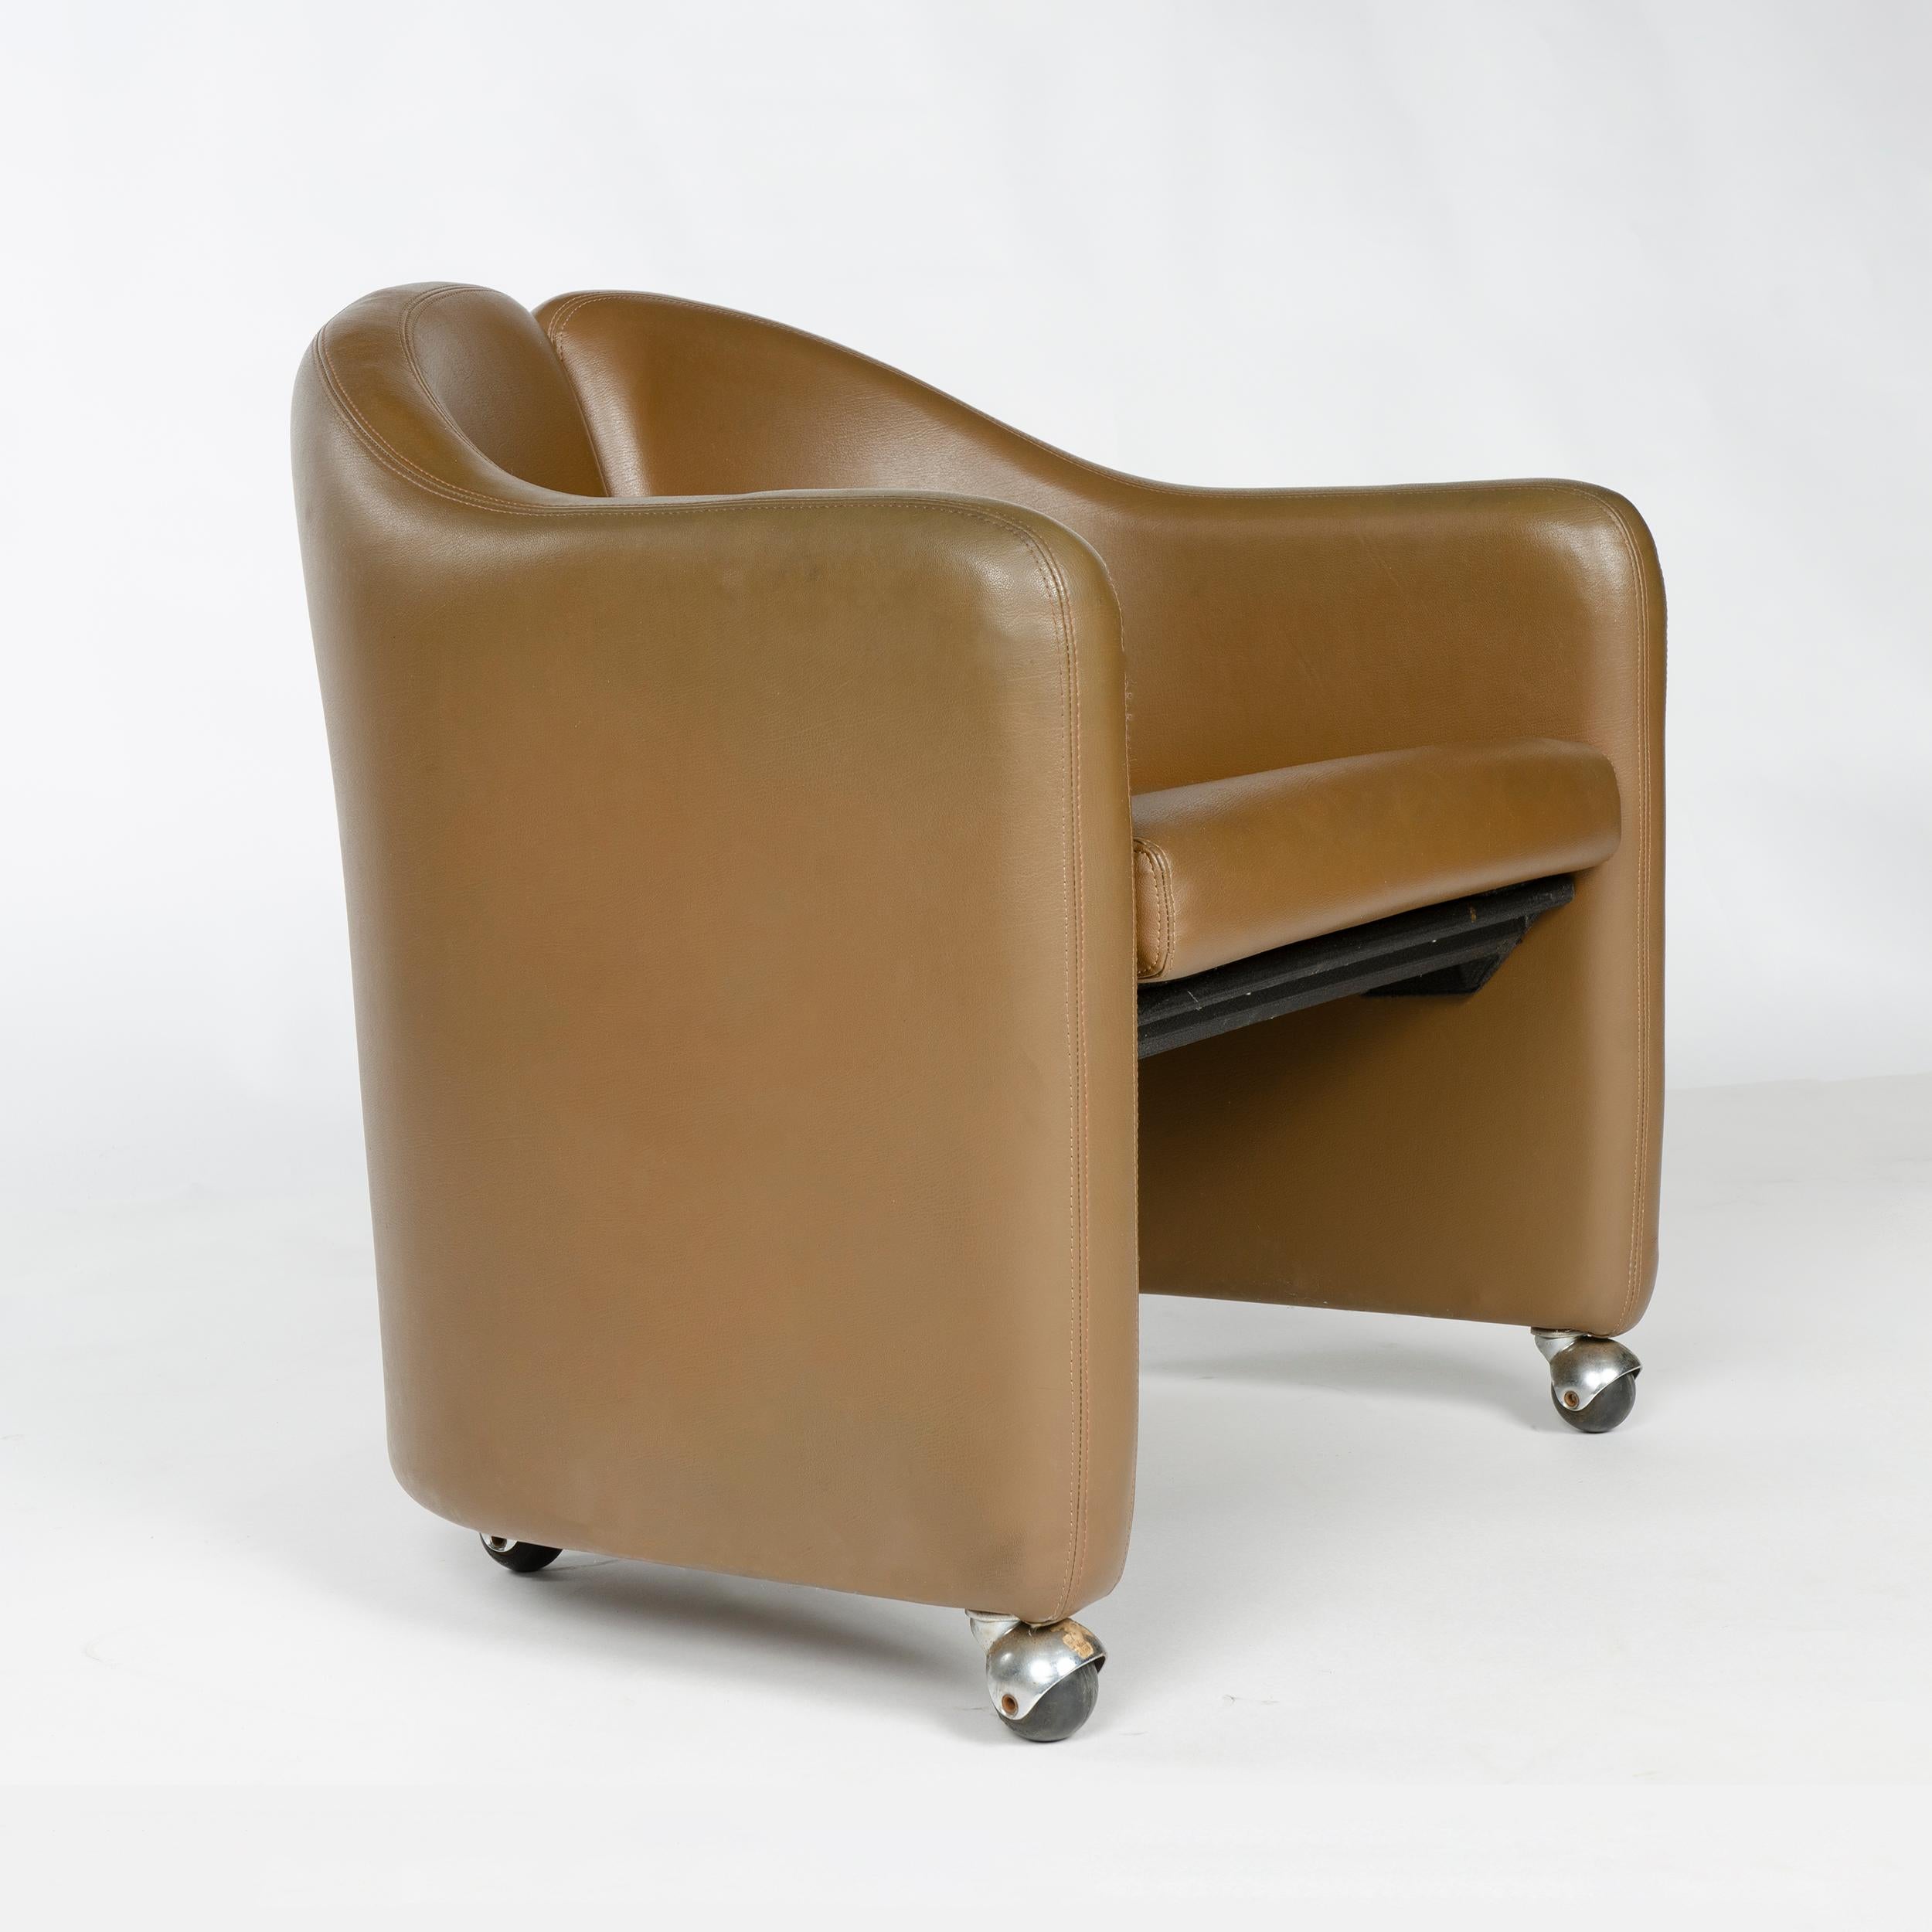 Late 20th Century 1970s Italian Barrel-Back Desk or Cocktail Chair by Eugenio Gerli for Tecno For Sale